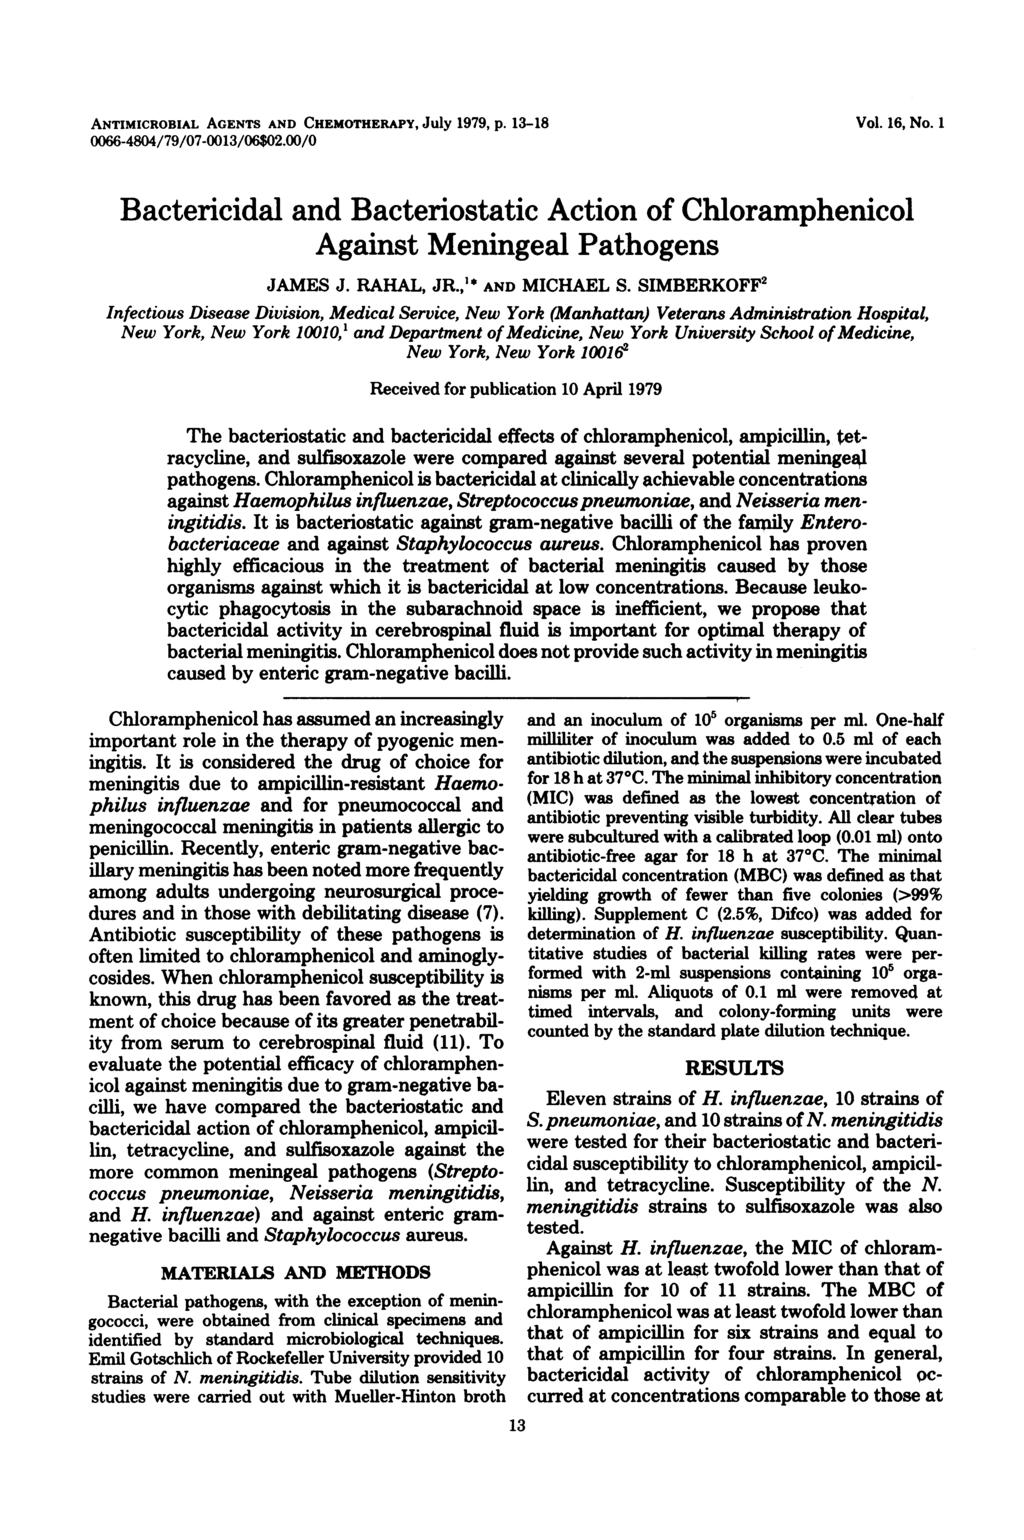 ANTIMICROBIAL AGENTS AND CHEMOTHERAPY, JUly 1979, p. 13-18 66-484/79/7-13/6$2./ Vol. 16, No. 1 Bactericidal and Bacteriostatic Action of Chloramphenicol Against Meningeal Pathogens JAMES J. RAHAL, JR.